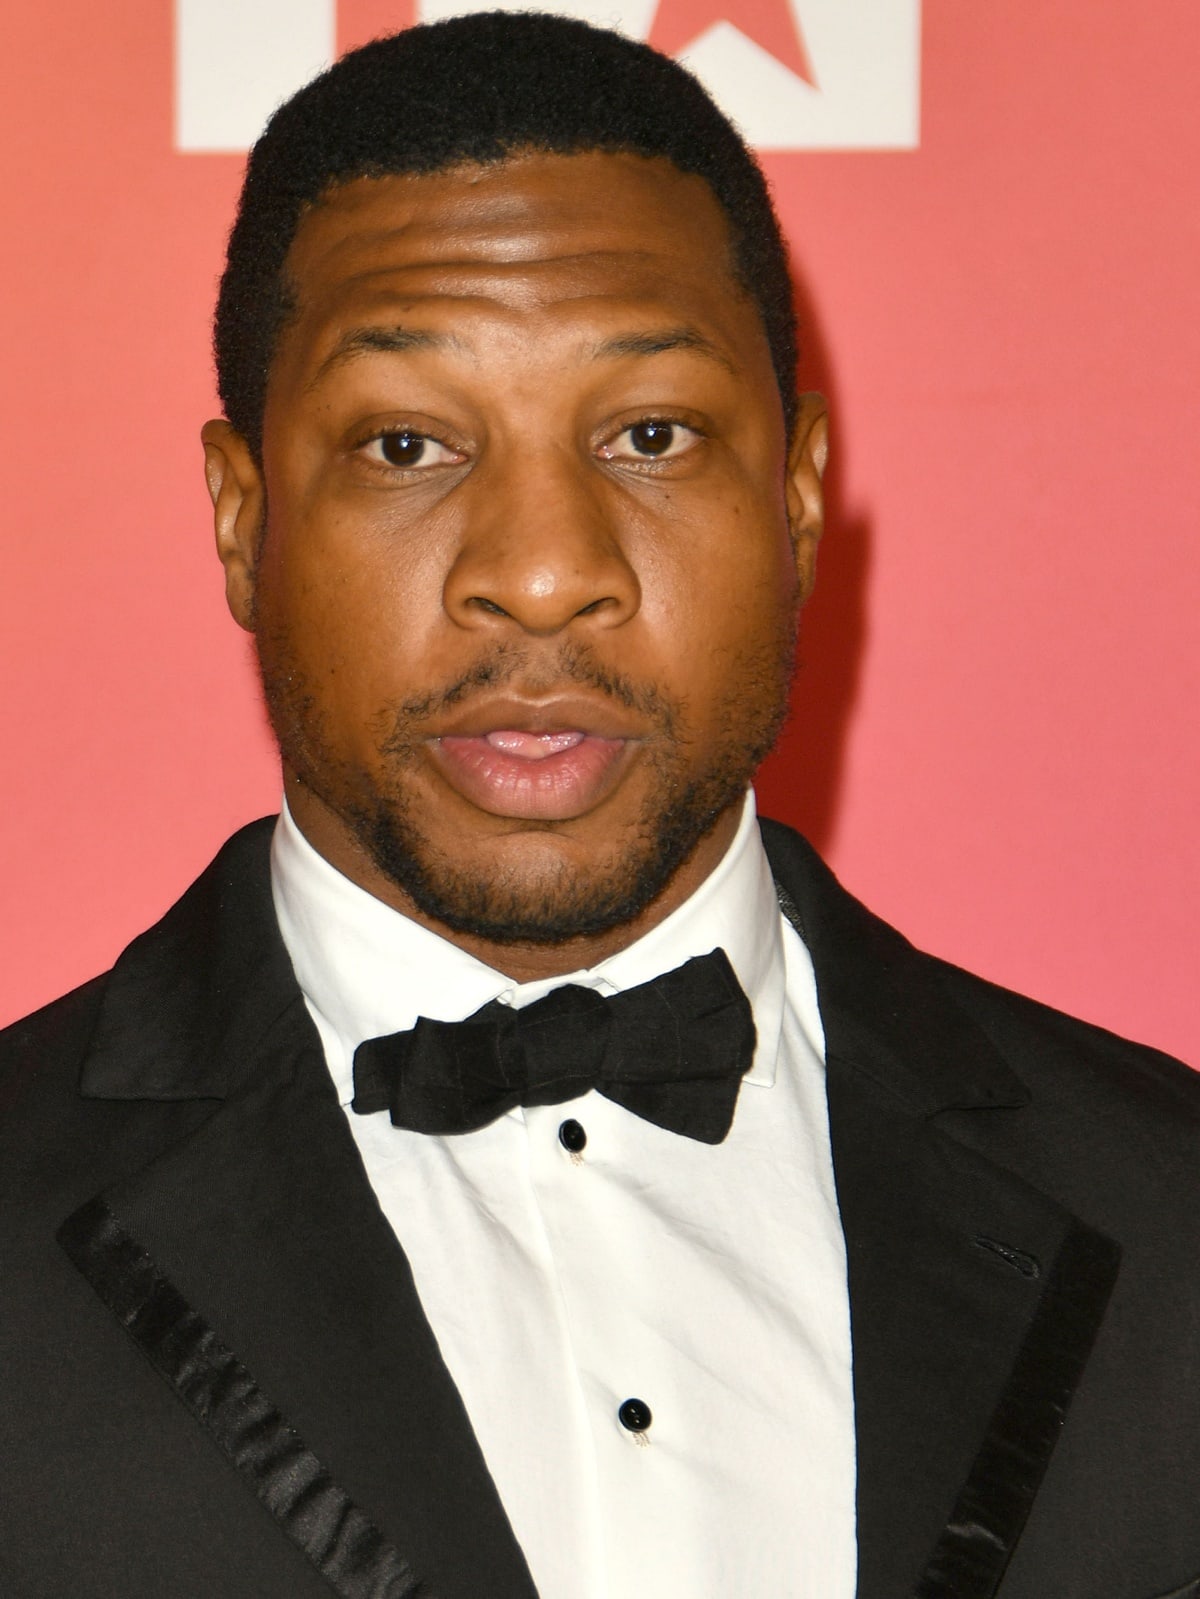 Jonathan Majors was charged with “strangulation, assault, and harassment” on March 25, 2023 in New York City